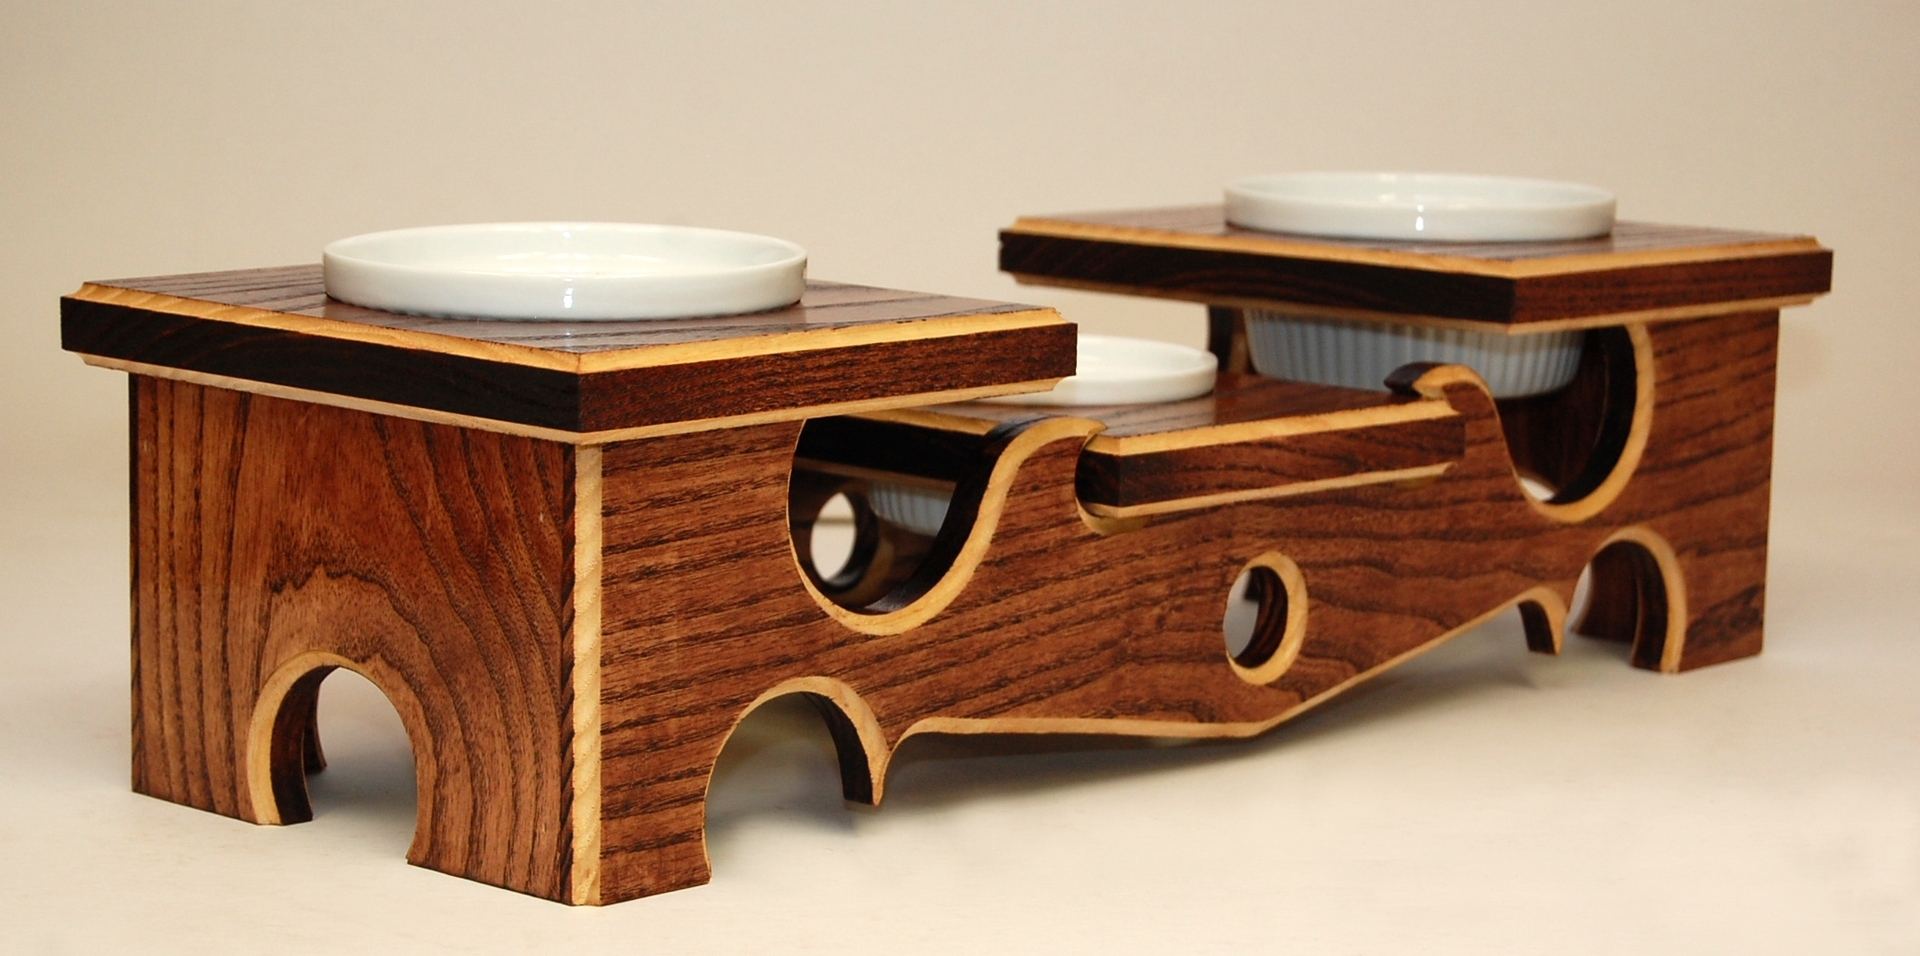 Silhouette Elevated Pet Feeder by Baro Woodworks at CustomMade.com